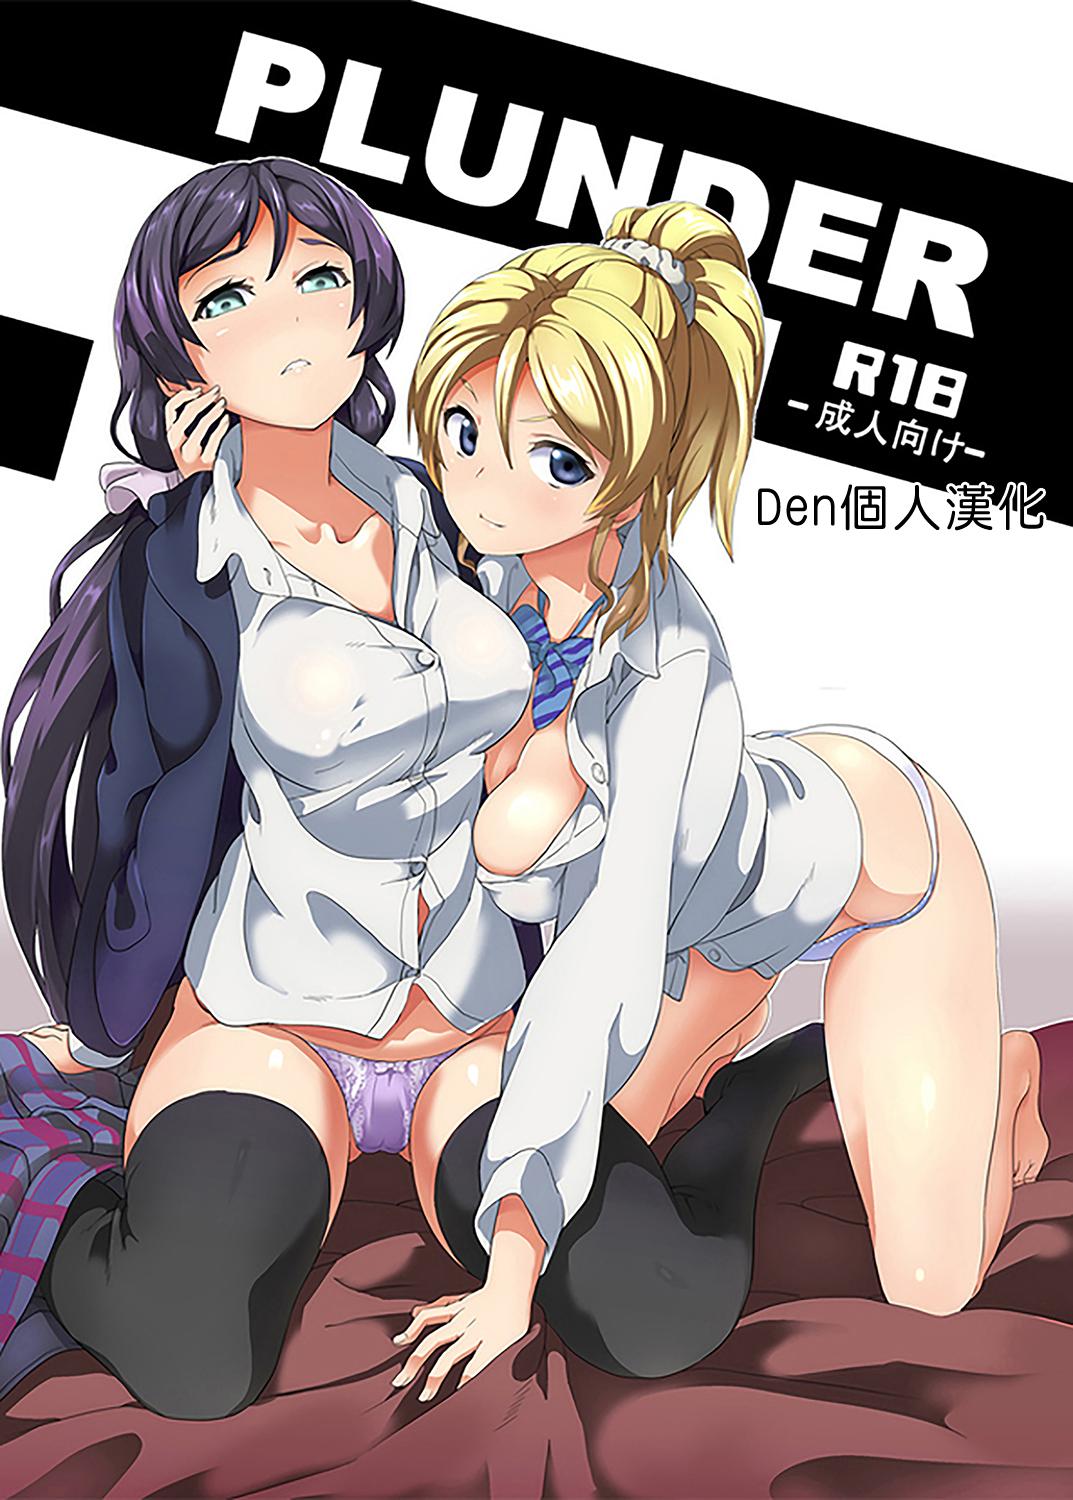 Porno 18 PLUNDER - Love live Thuylinh - Page 1